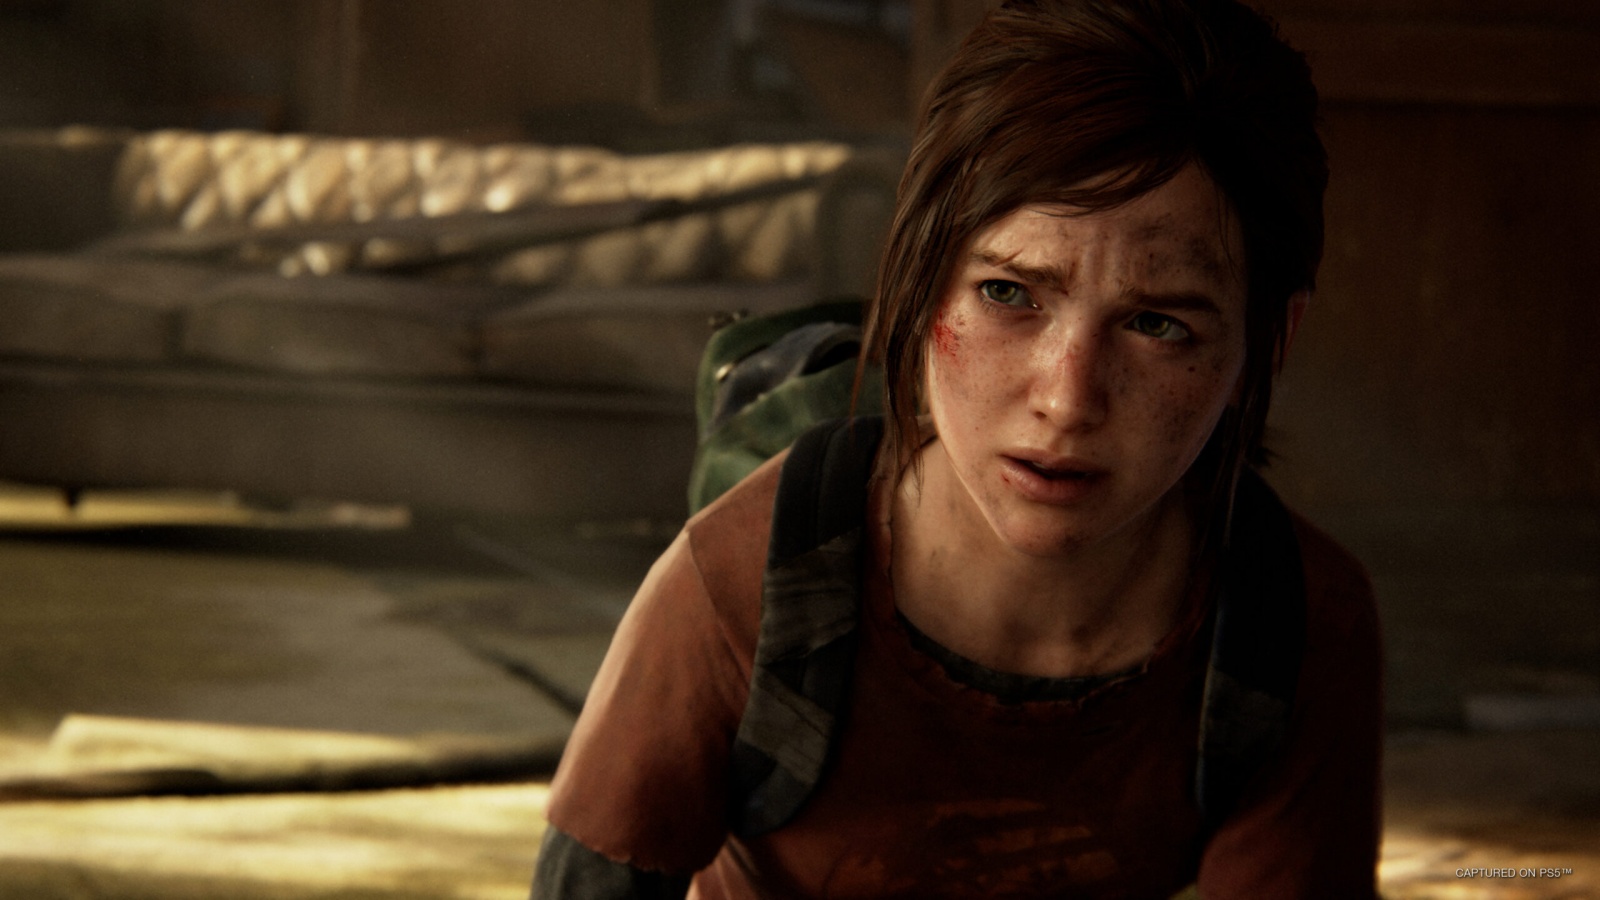 The Last of Us Part I for PC Release Pushed Back for Extra Polishing